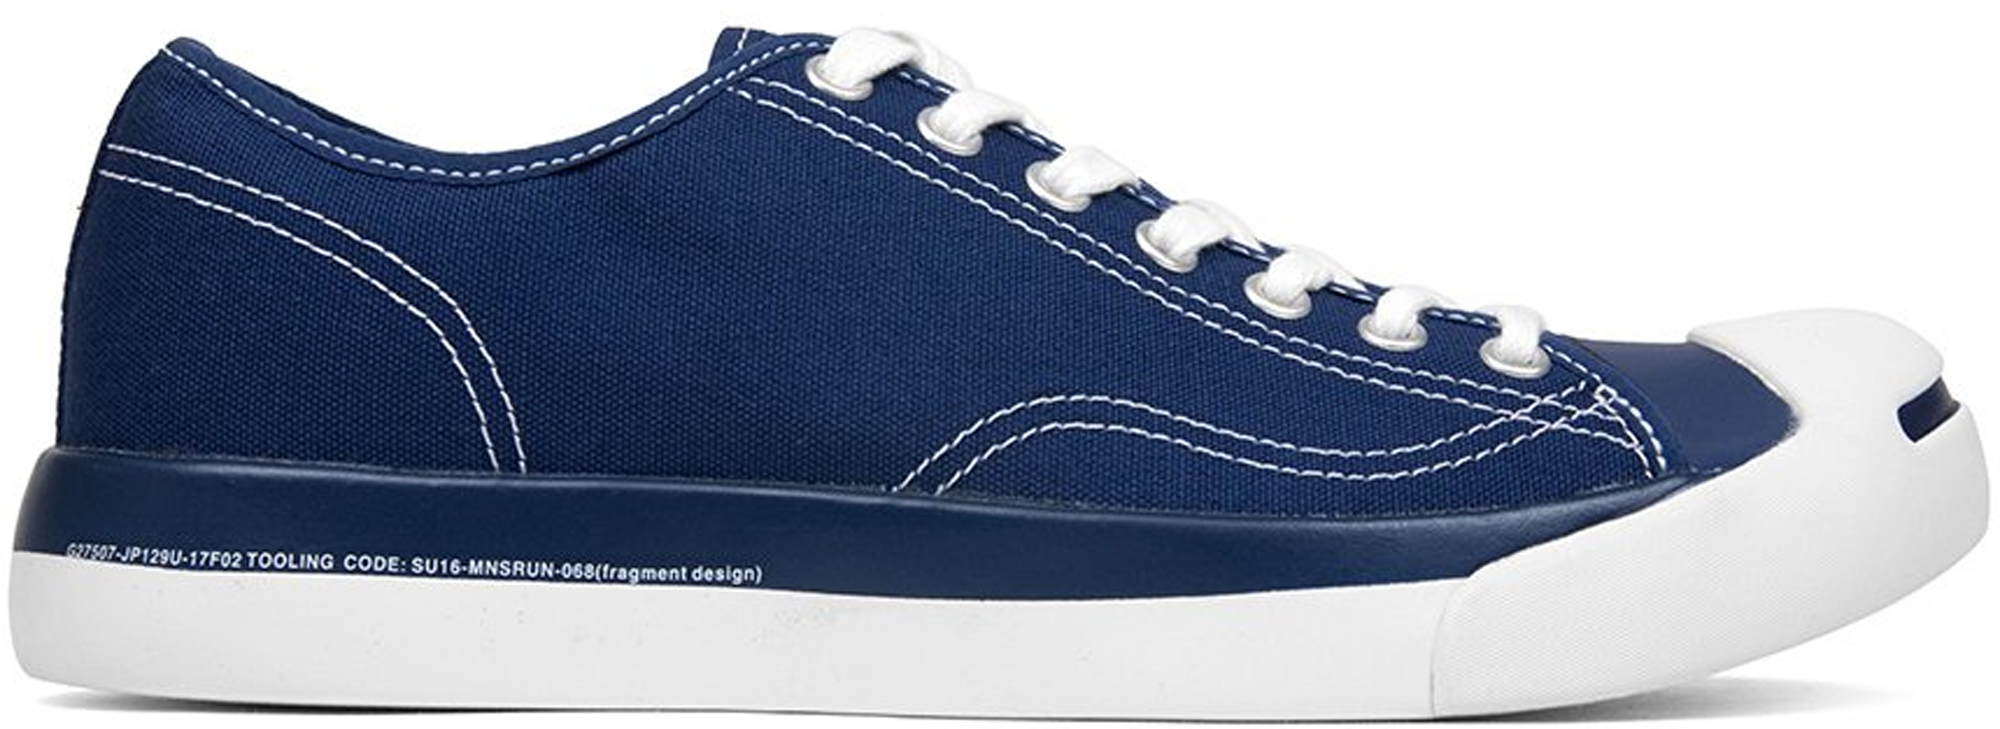 converse jack purcell navy ox